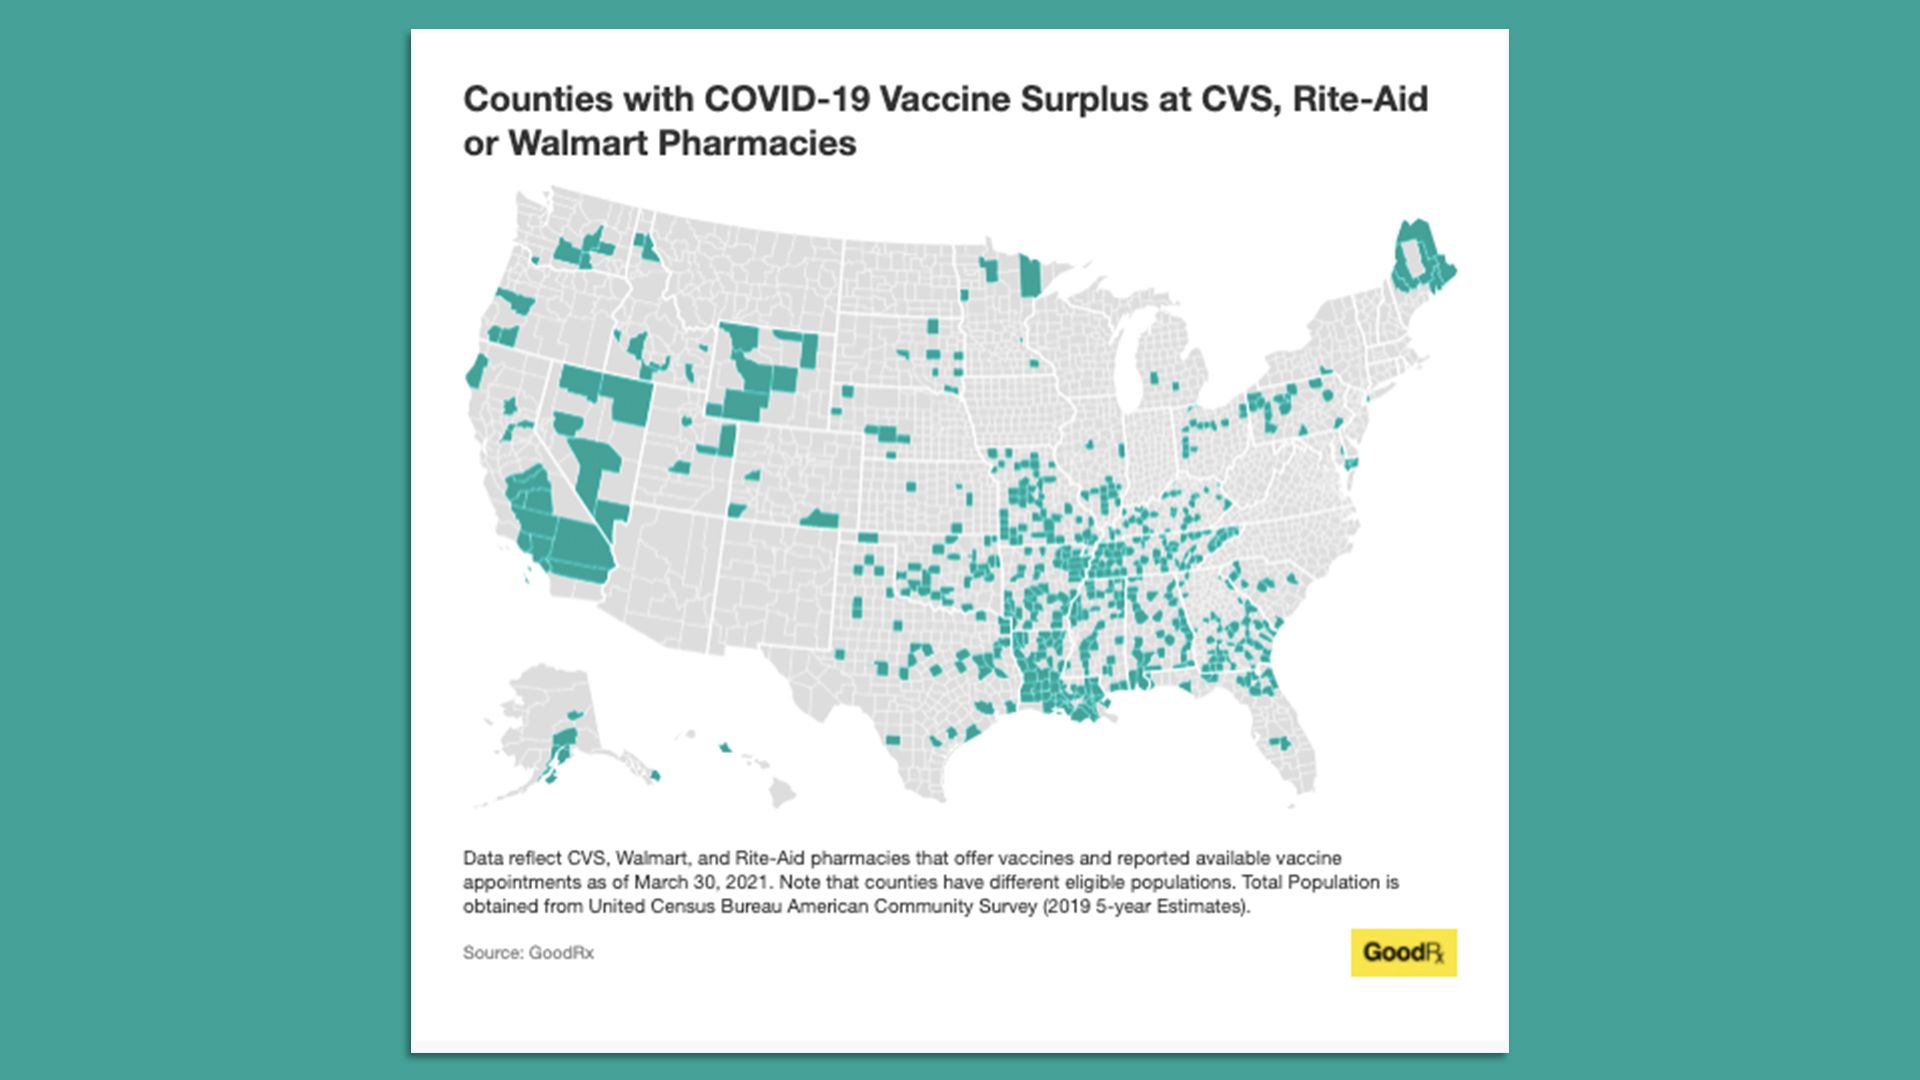 Map of counties with vaccine surplus at pharmacies